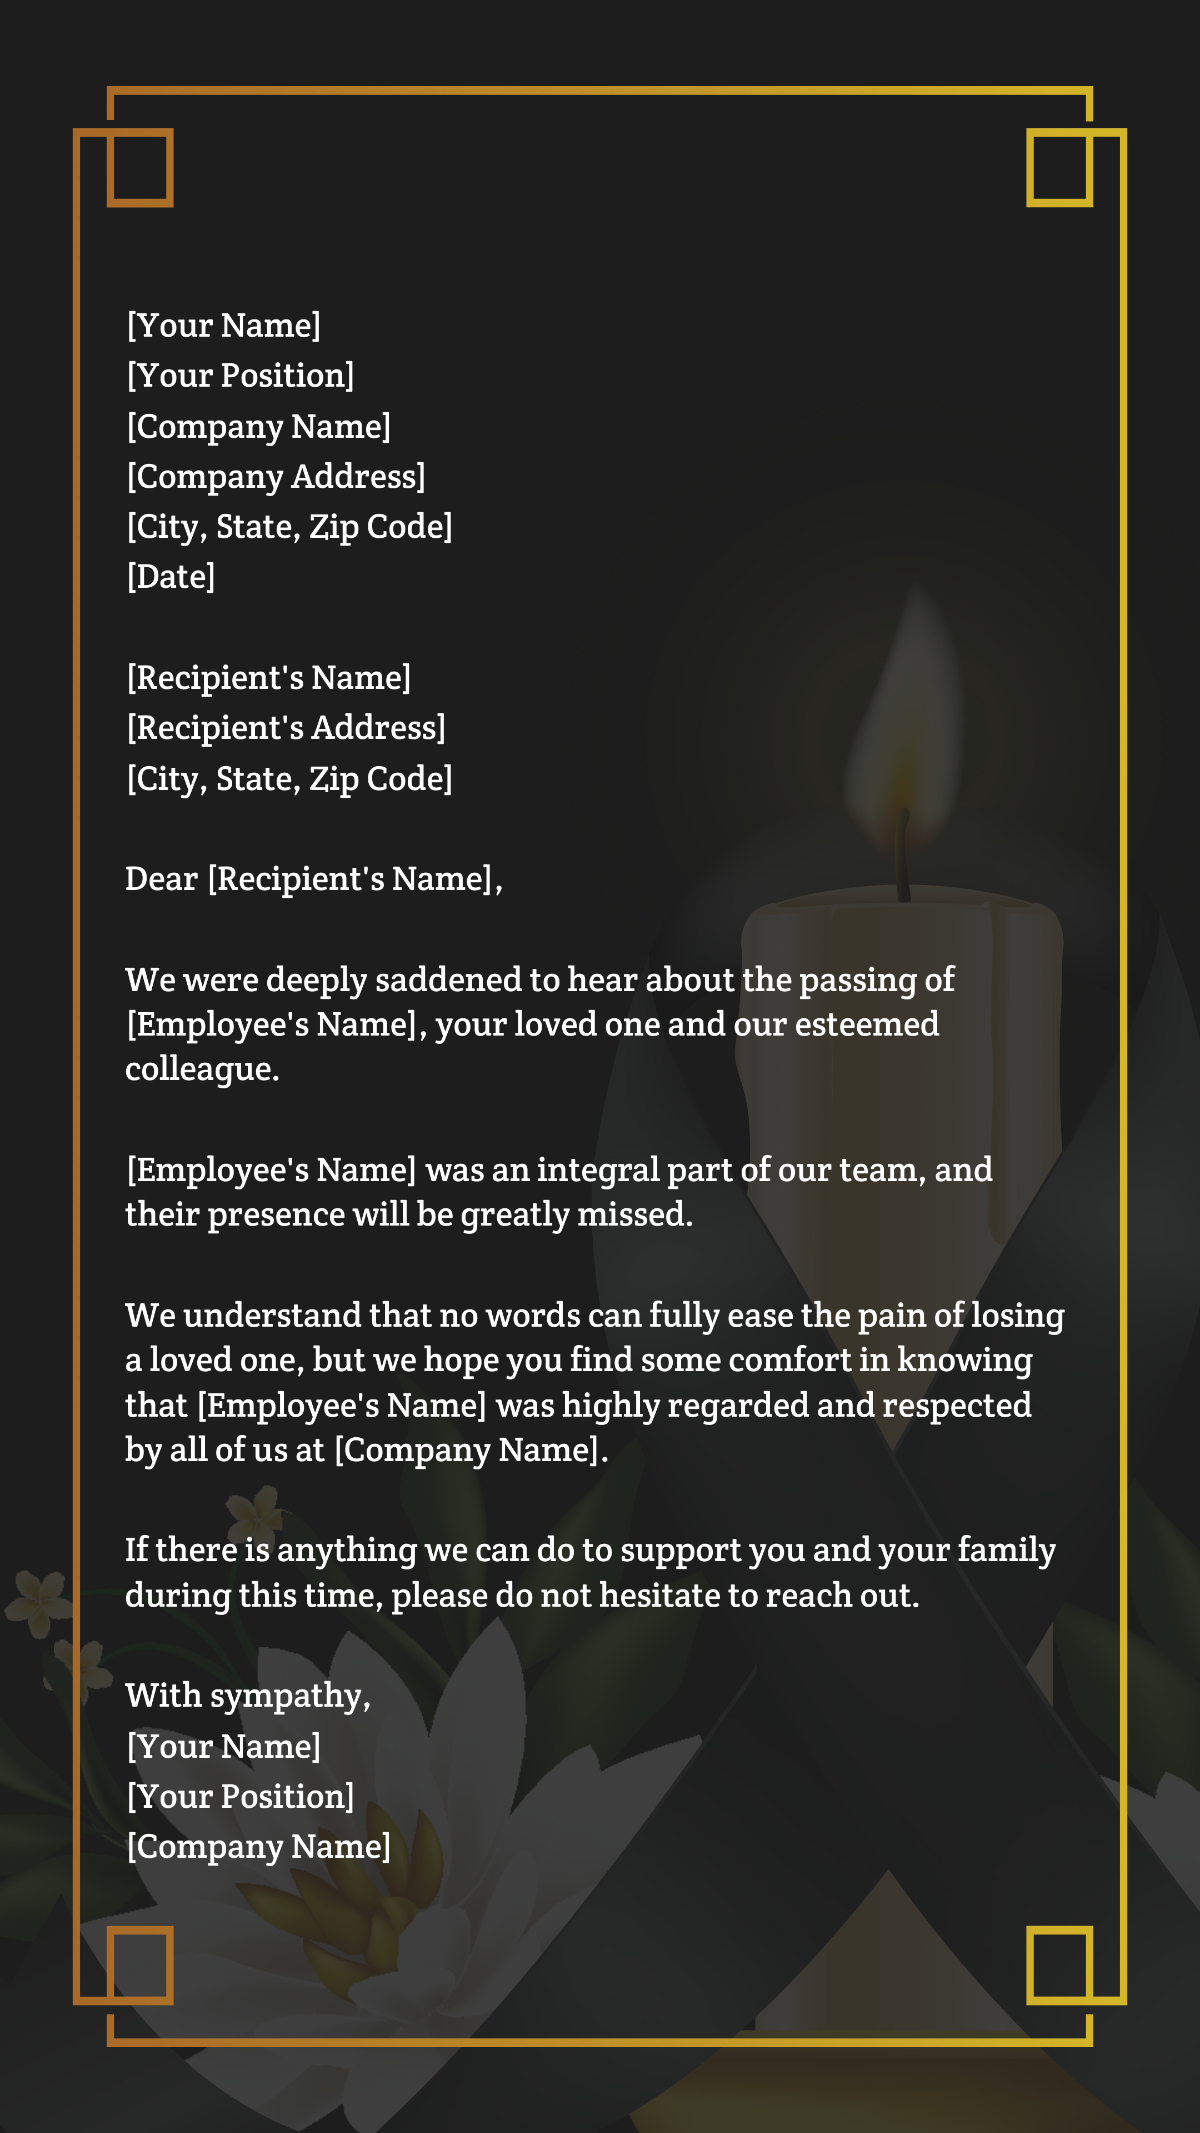 Condolence Letter To Employee Family